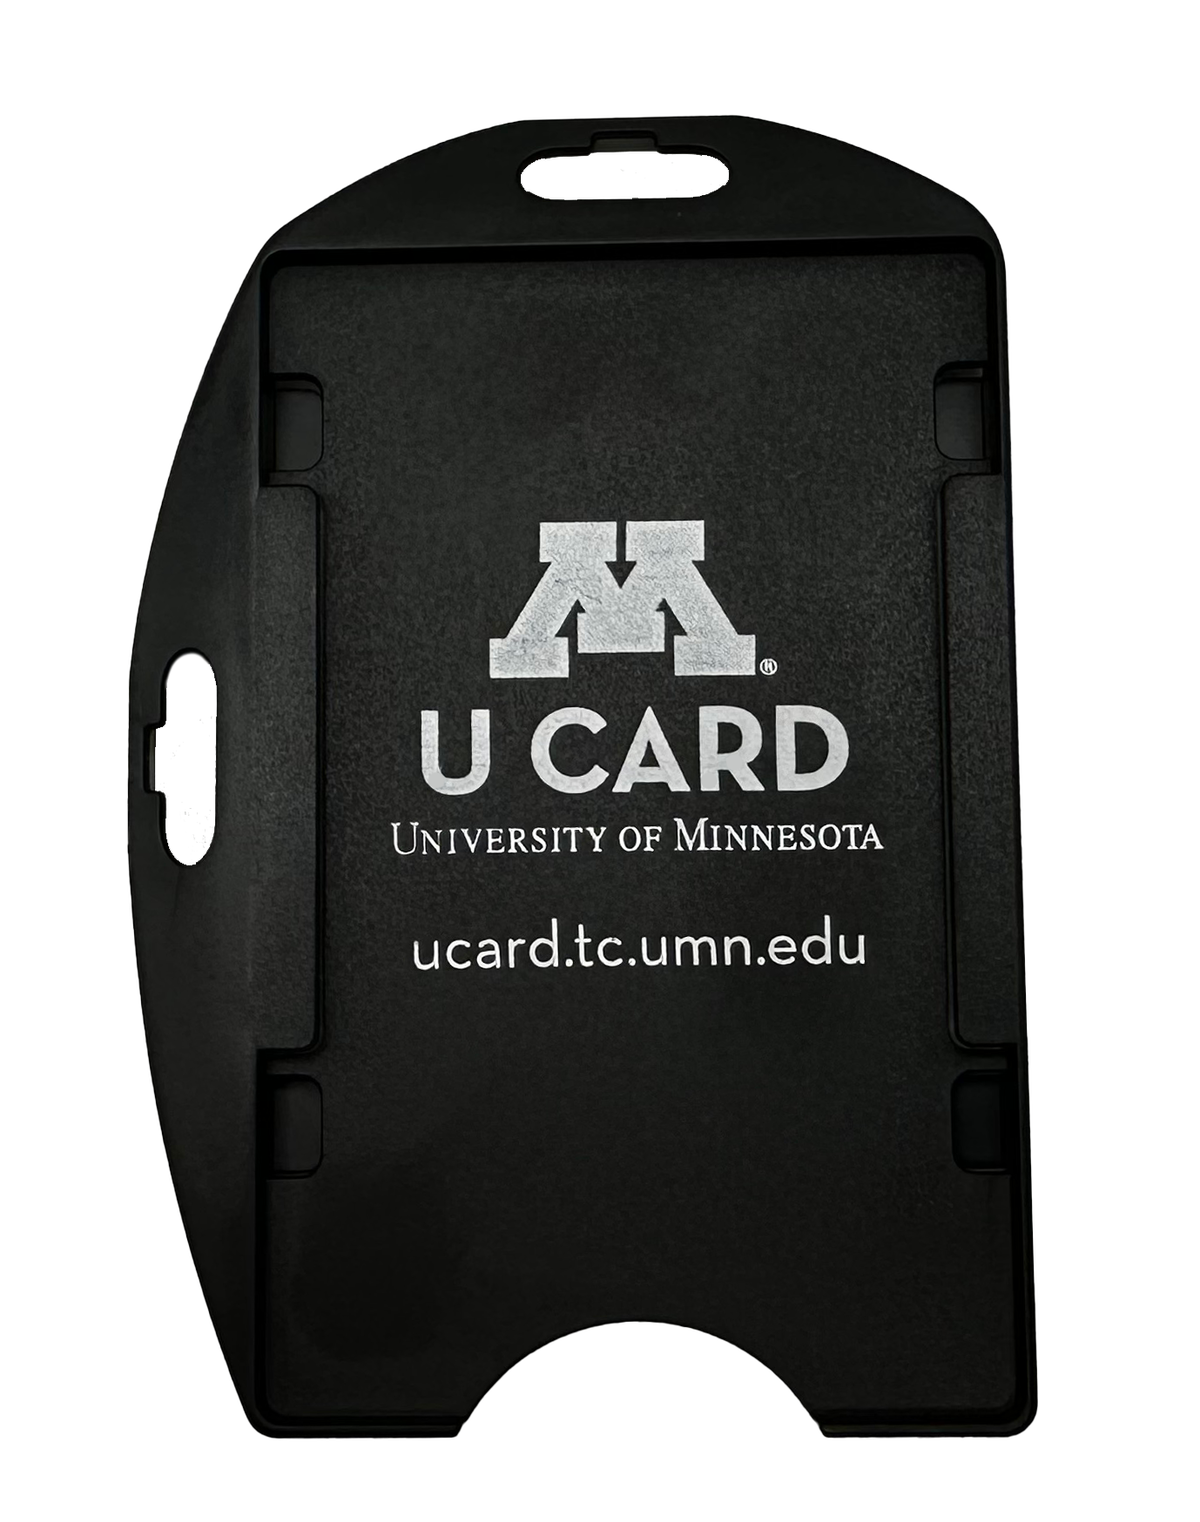 U Card hard holder - shows a black holder with block M, "U Card" and "University of Minnesota" in text, along with the U card website address.